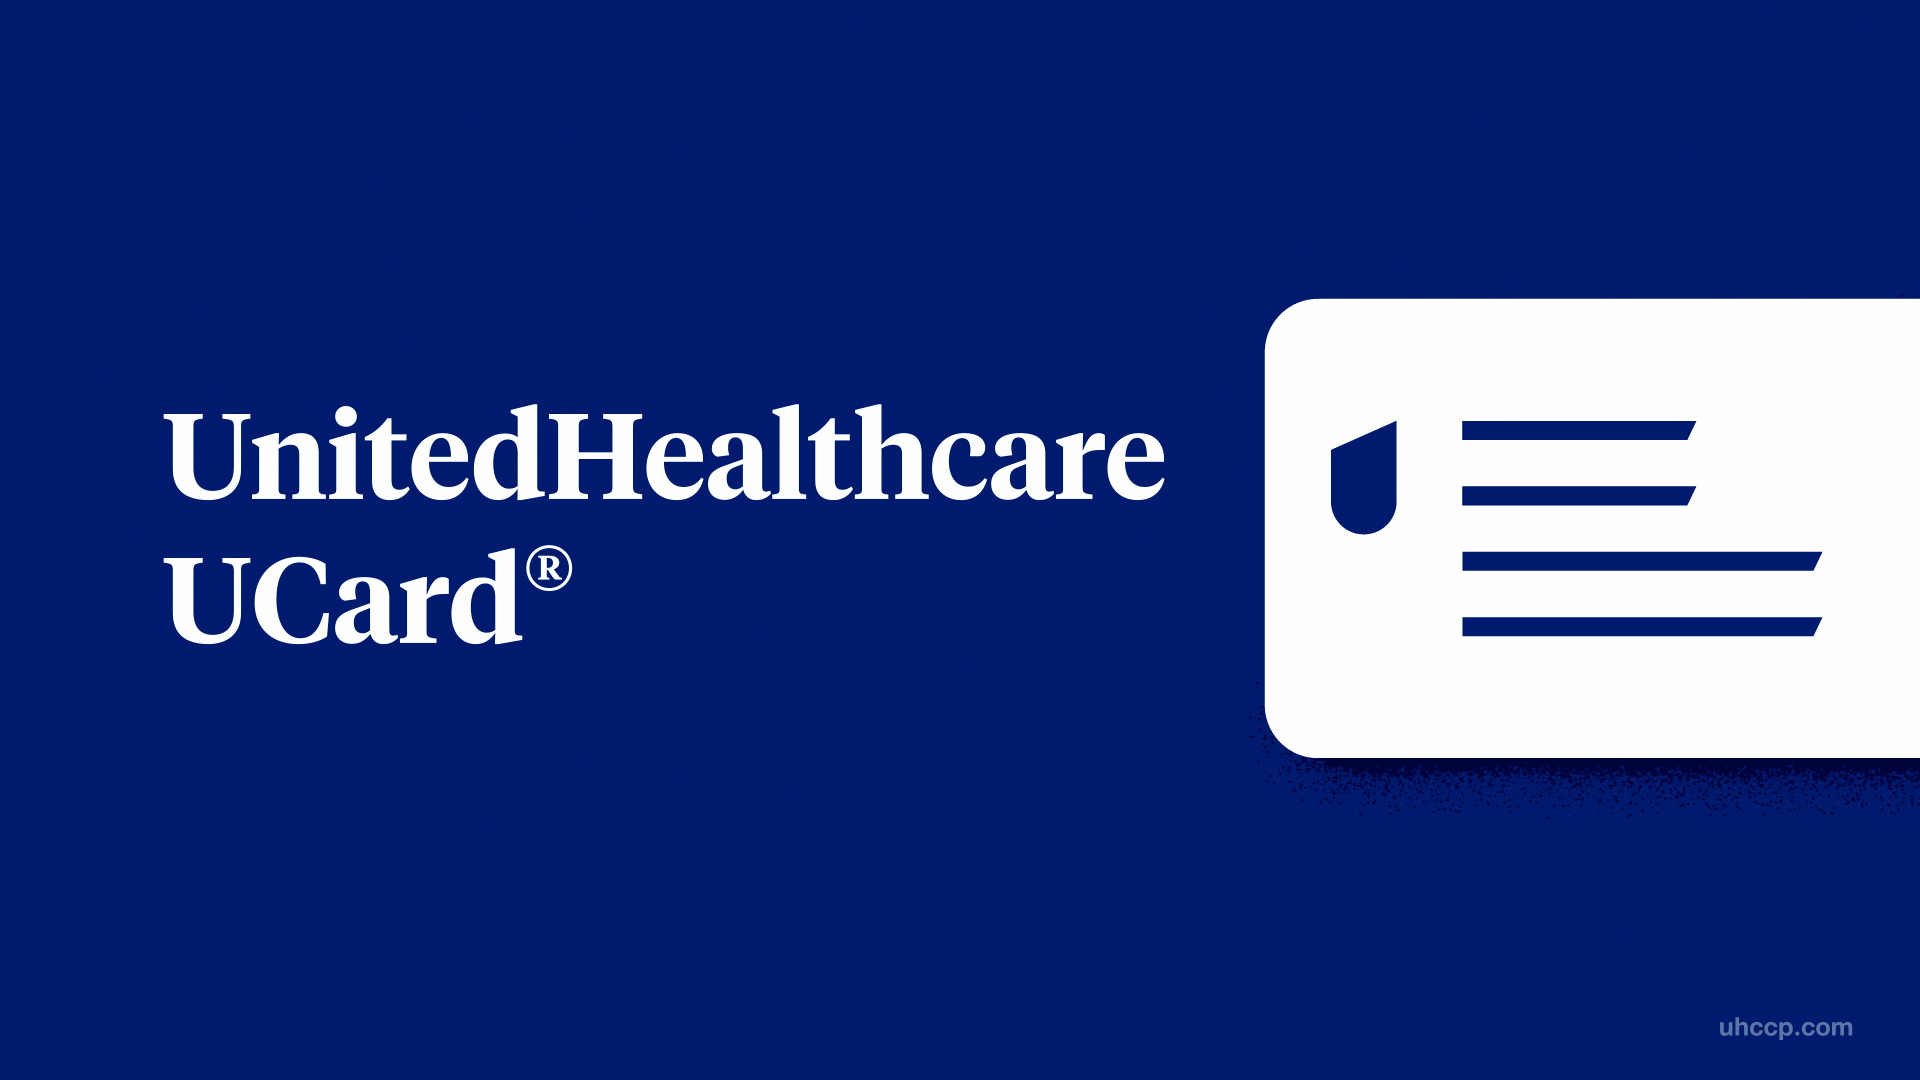 Food, OTC and utility bill credit with Medicare plans UnitedHealthcare